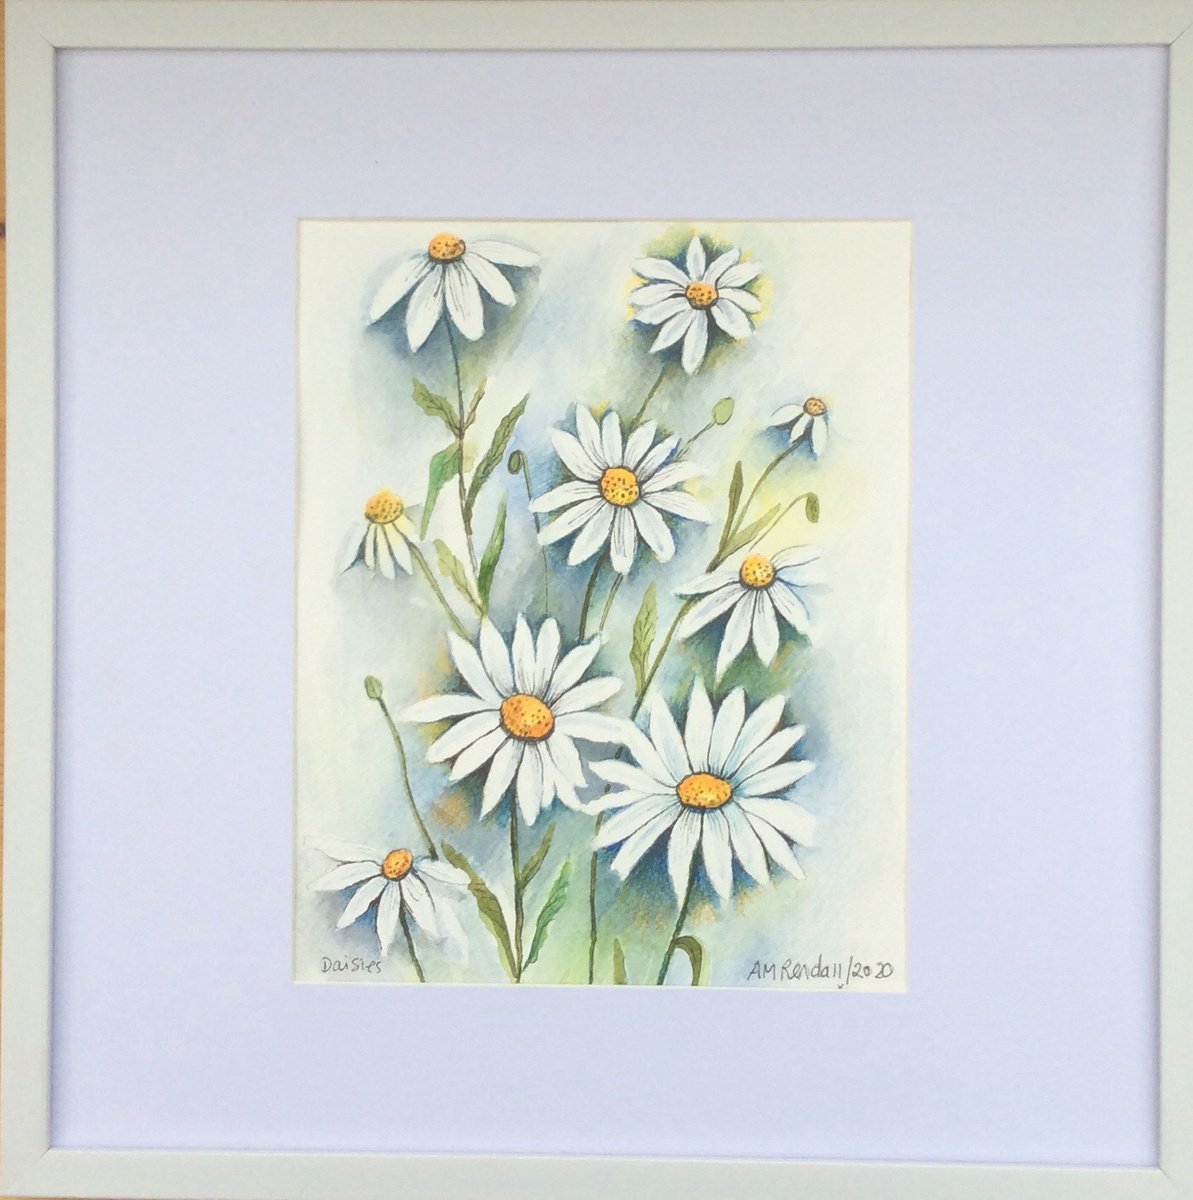 Daisies by Angela Rendall